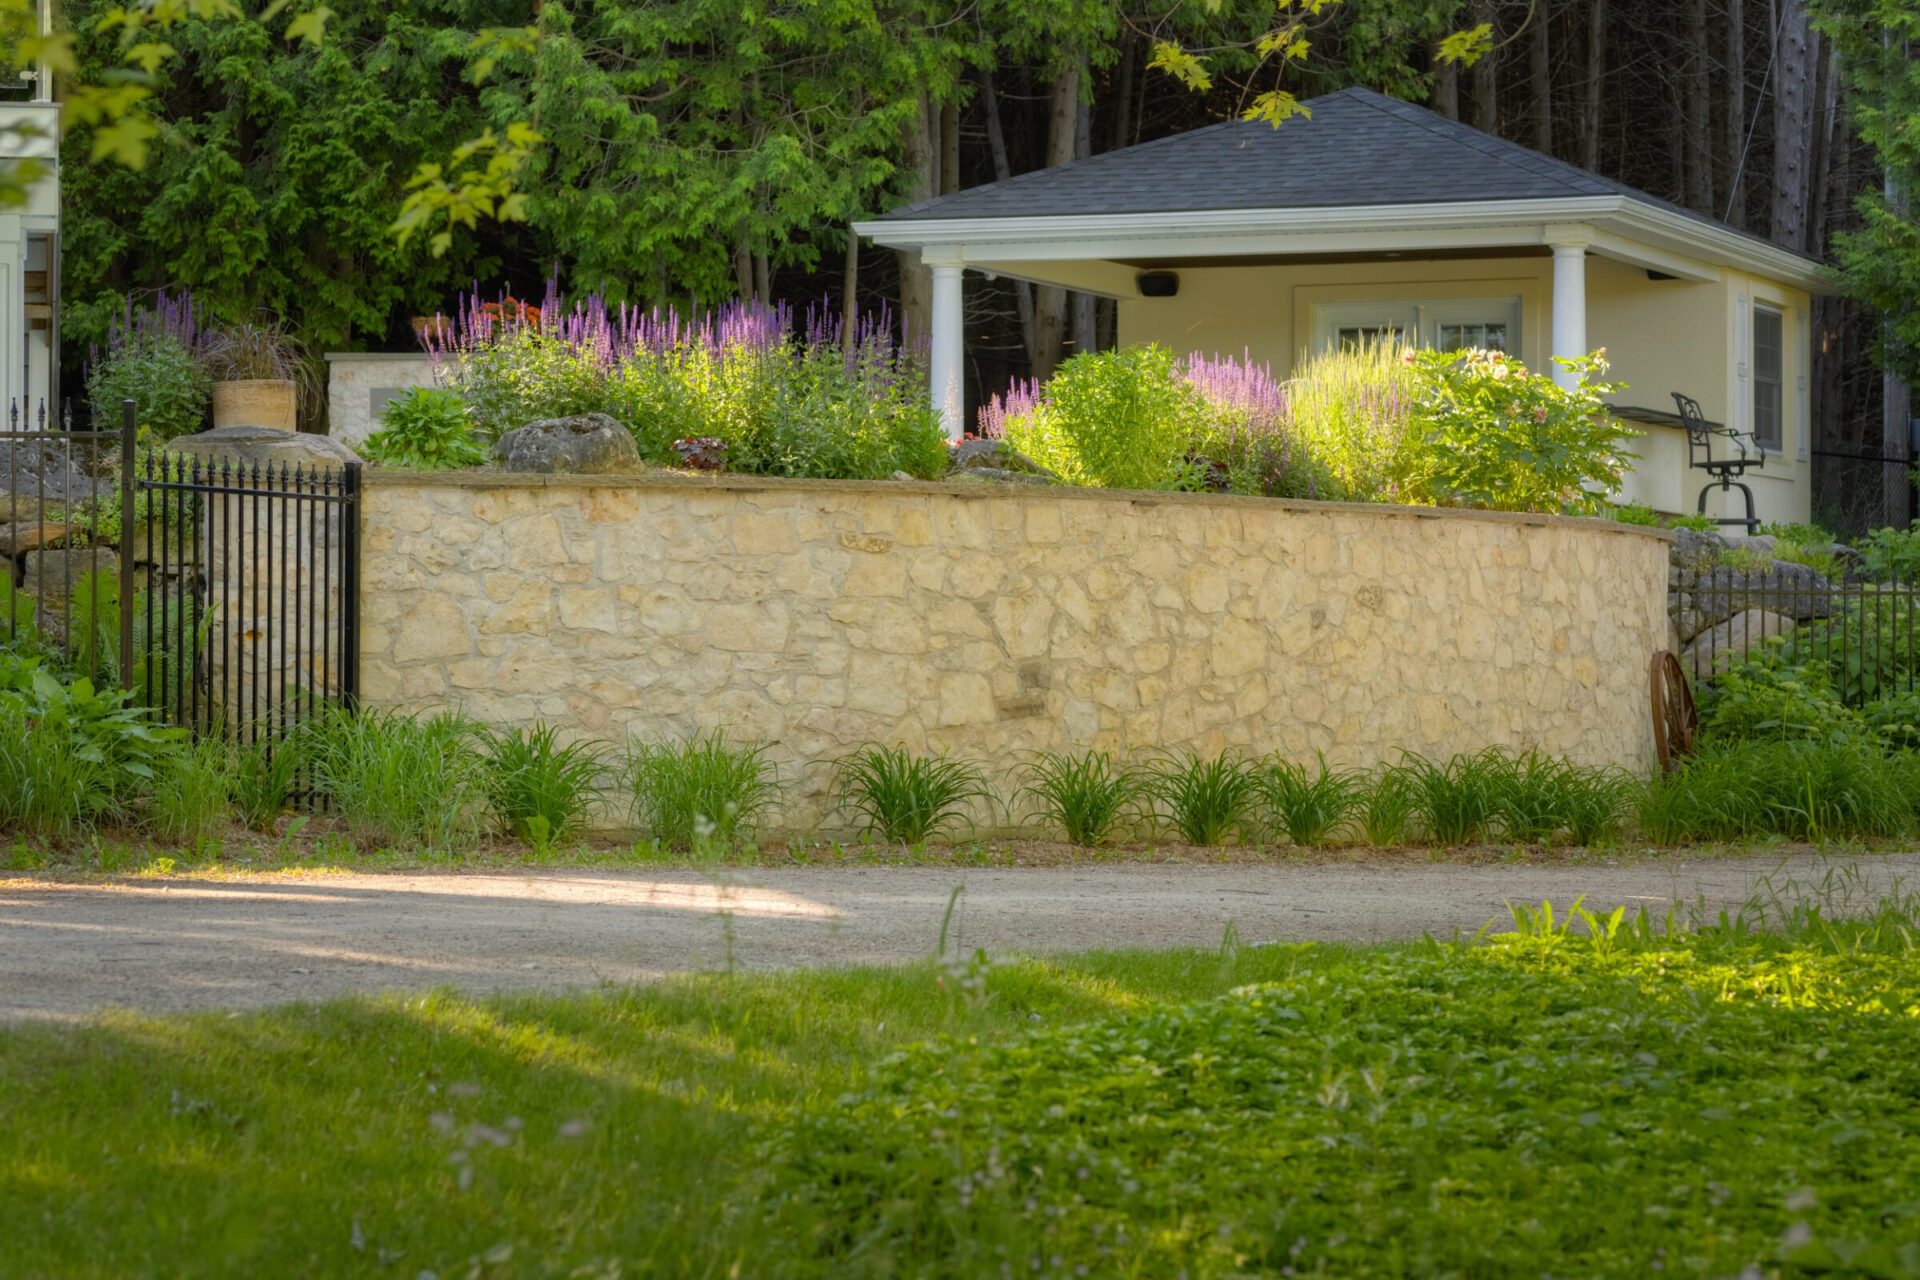 A stone garden wall adorned with purple flowers surrounds a residential property with a small building, lush greenery, and a metal gate.